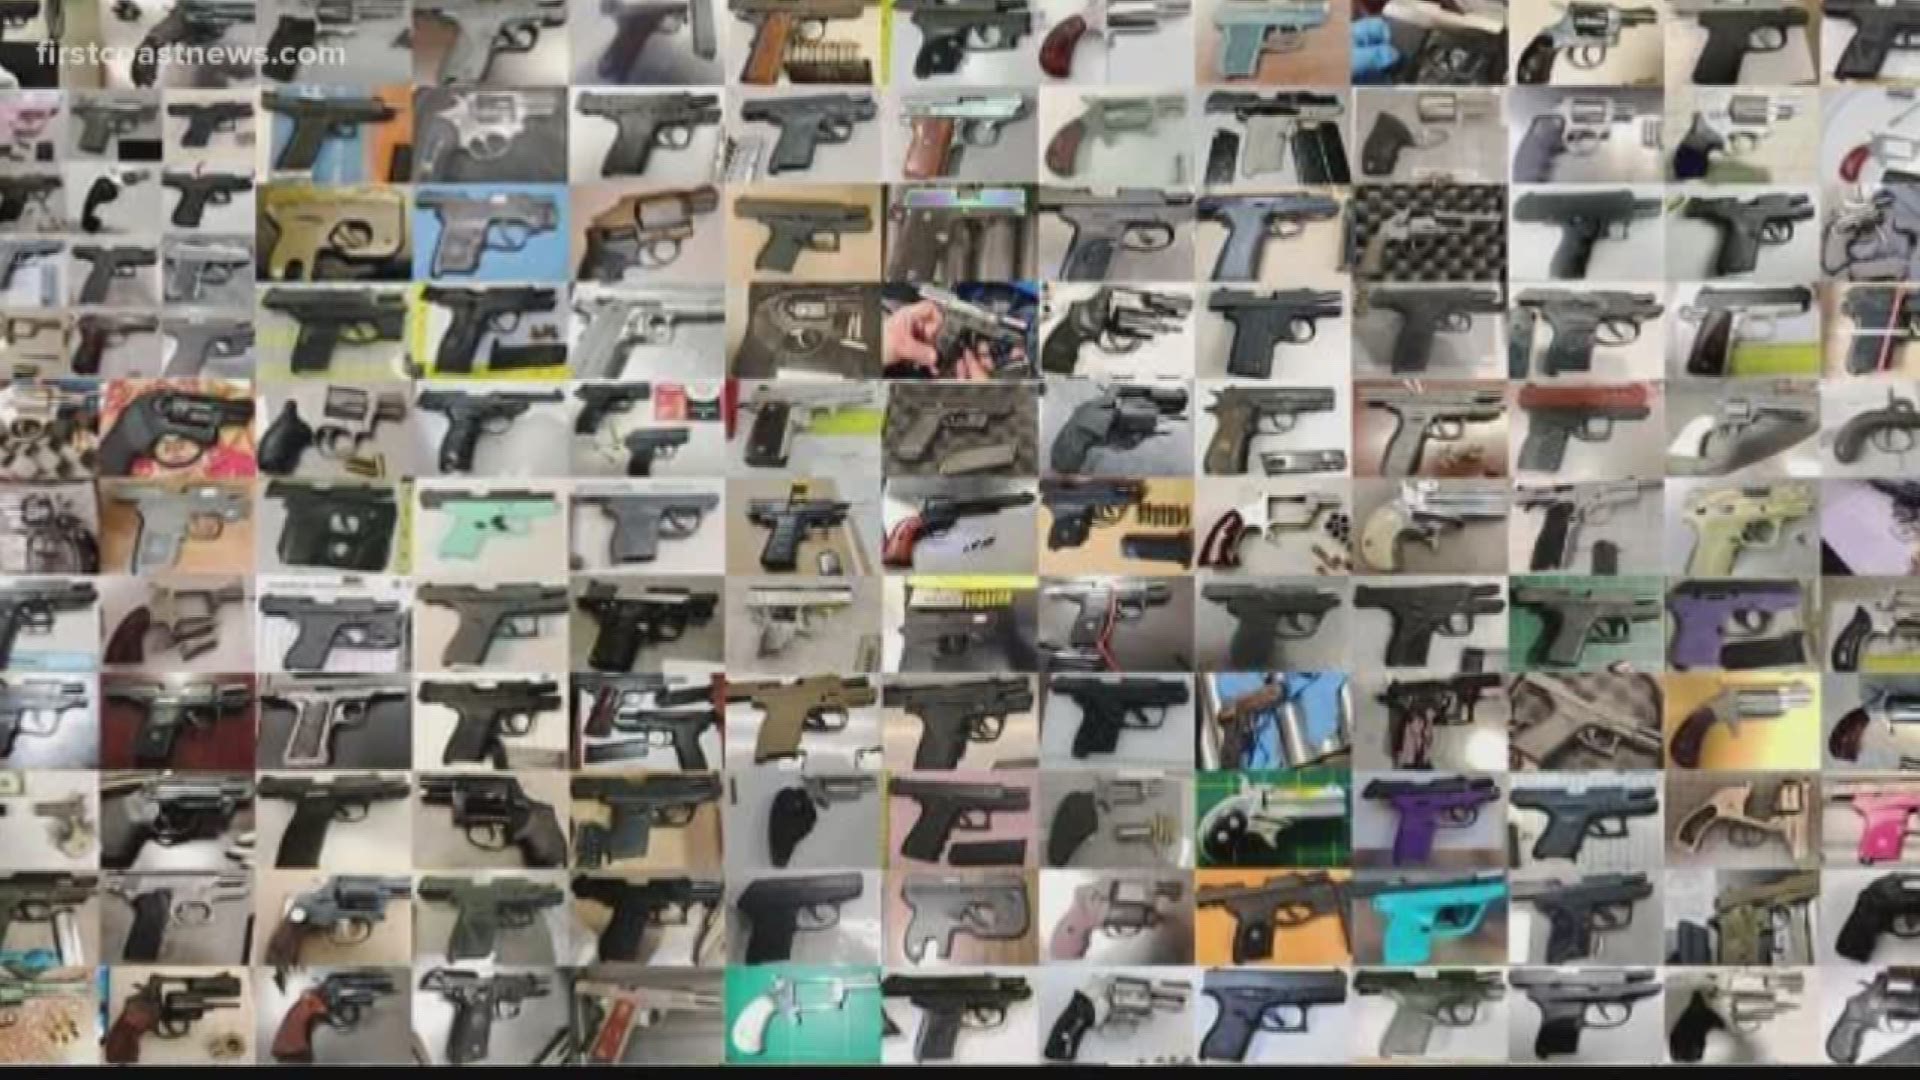 Over 4,000 guns were found at airports across the country last year. Many of the airports where the most were found are right here in Florida.